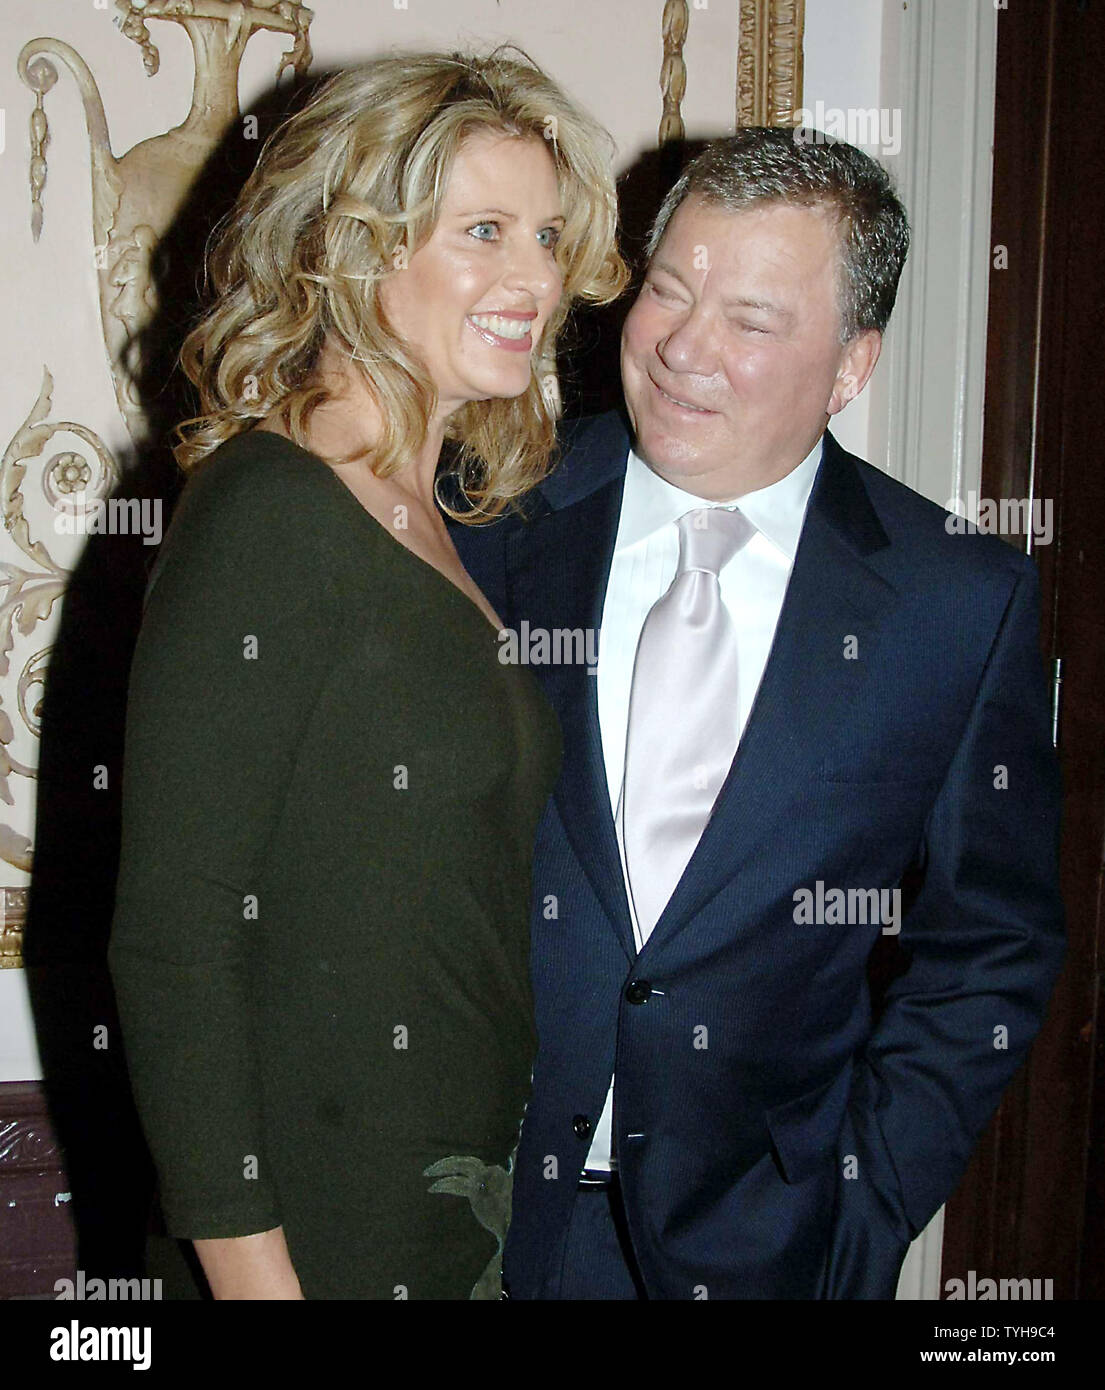 Actor director William Shatner and his wife Elizabeth await Shatner induction on Oct. 24, 2005 at the 15th annual Broadcasting and Cable Hall of Fame festivities held in New York.  (UPI Photo/Ezio Petersen) Stock Photo